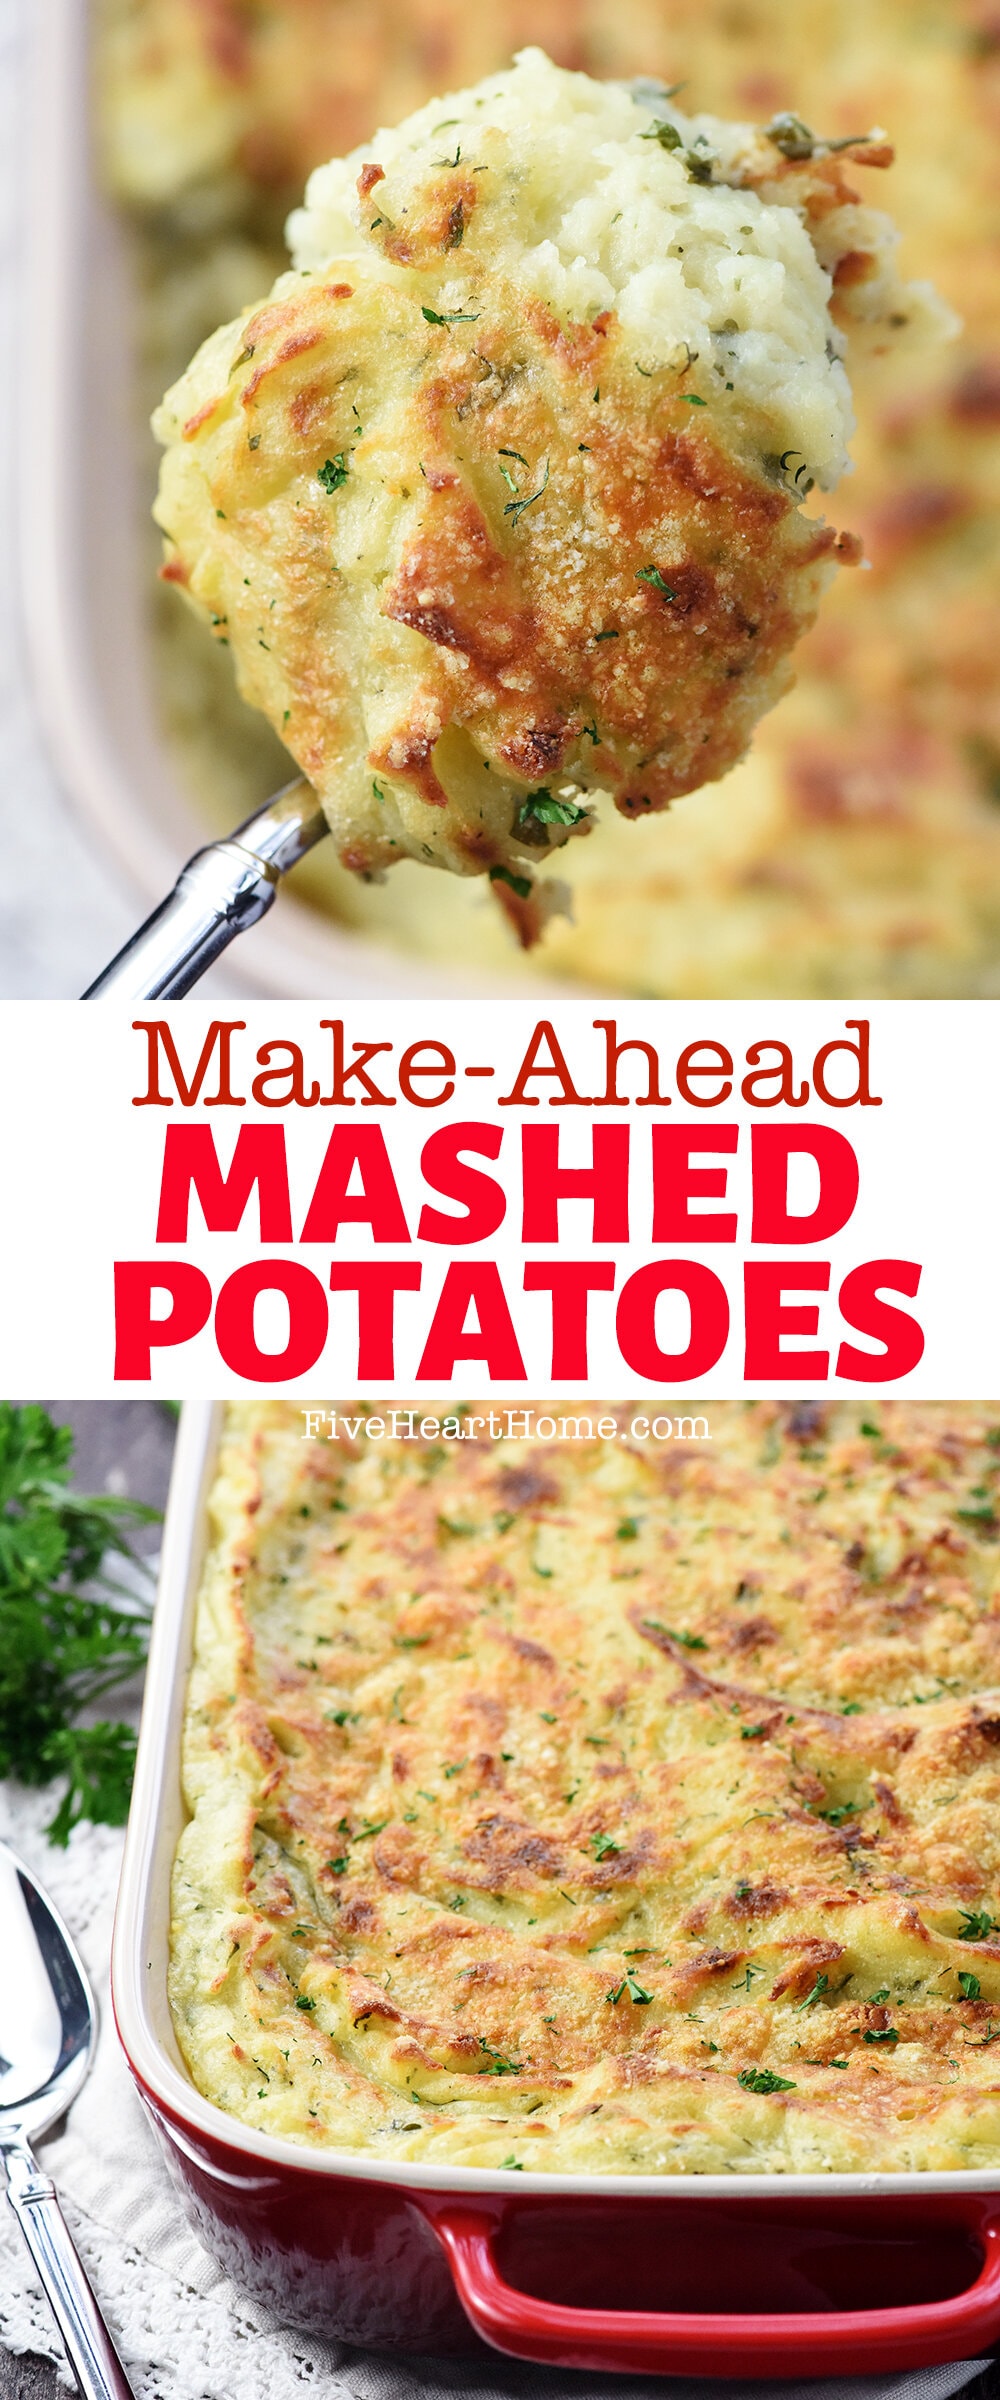 Make-Ahead Mashed Potatoes ~ creamy and decadent, loaded with mellow garlic and fresh herbs, and topped with a golden Parmesan crust for a delicious holiday side dish! | FiveHeartHome.com via @fivehearthome